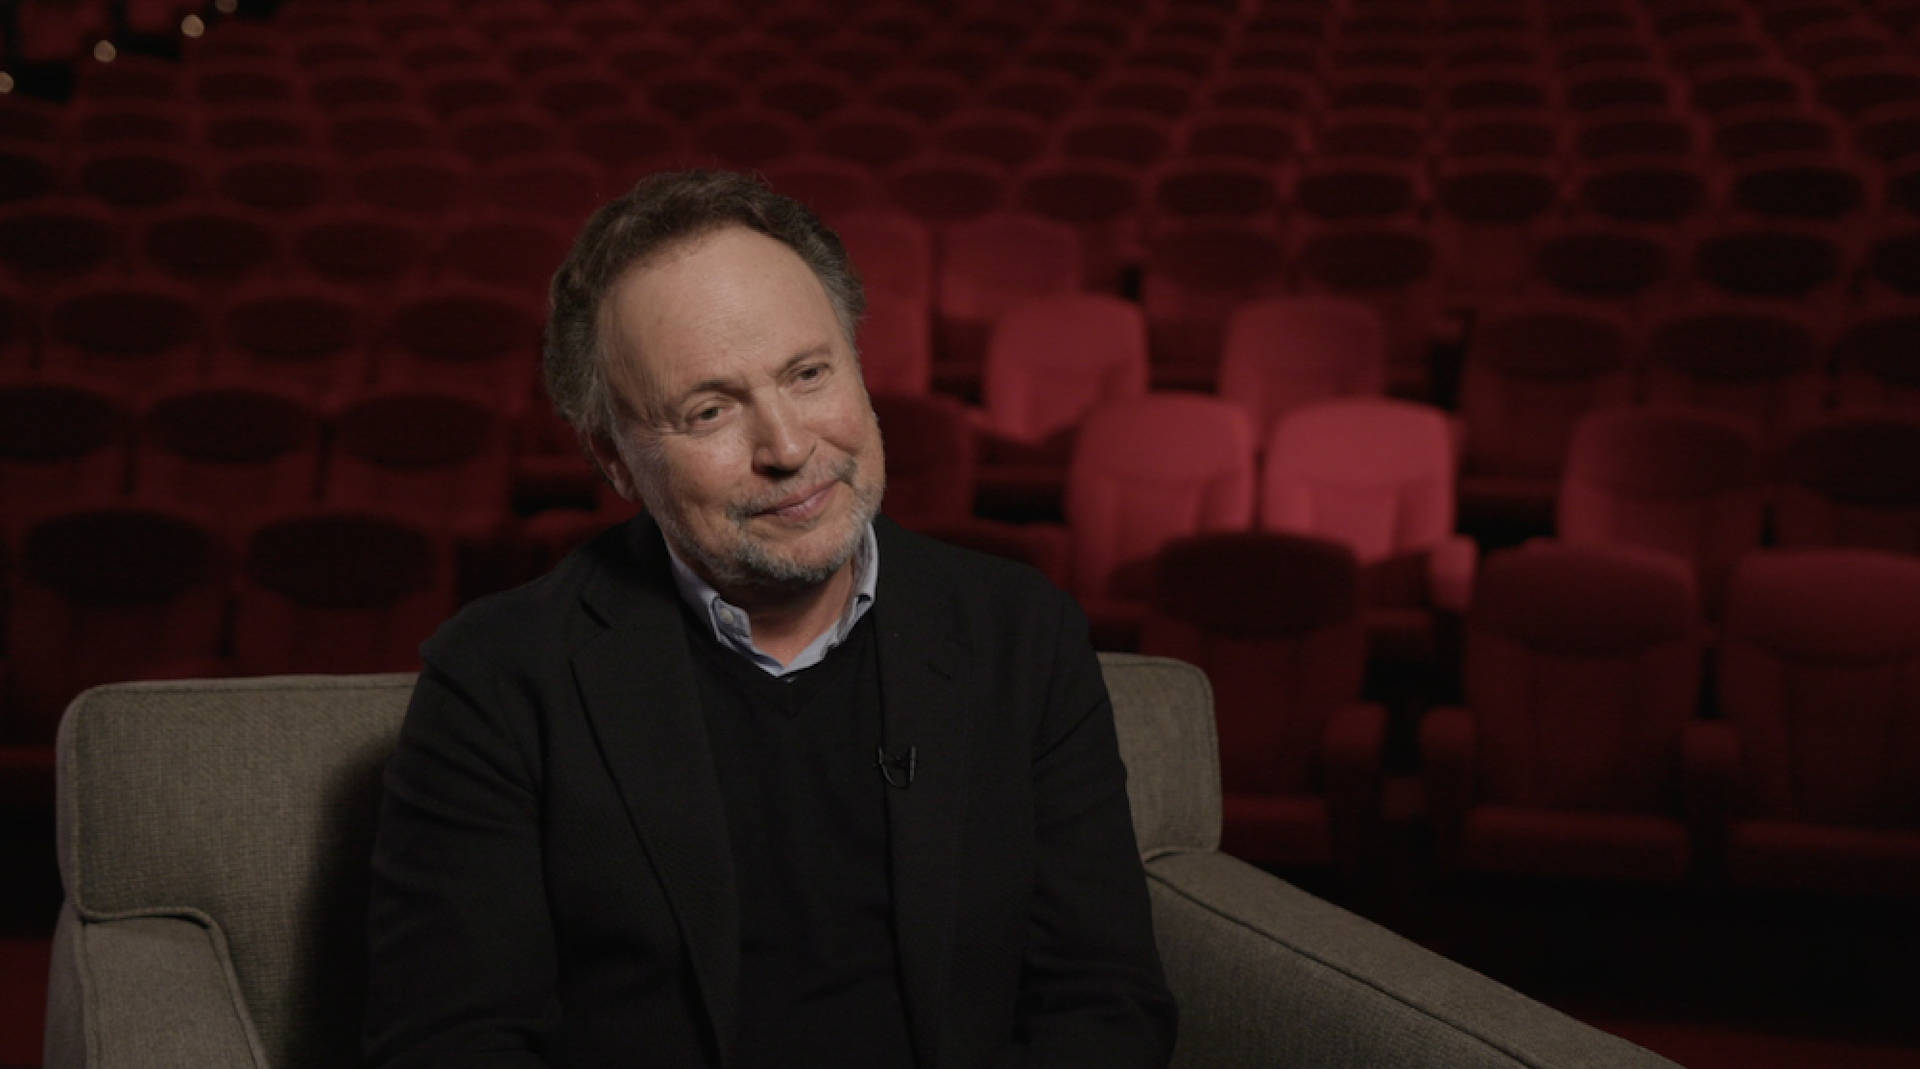 Billy Crystal during an Interview in an Ornate Movie Theatre Wallpaper